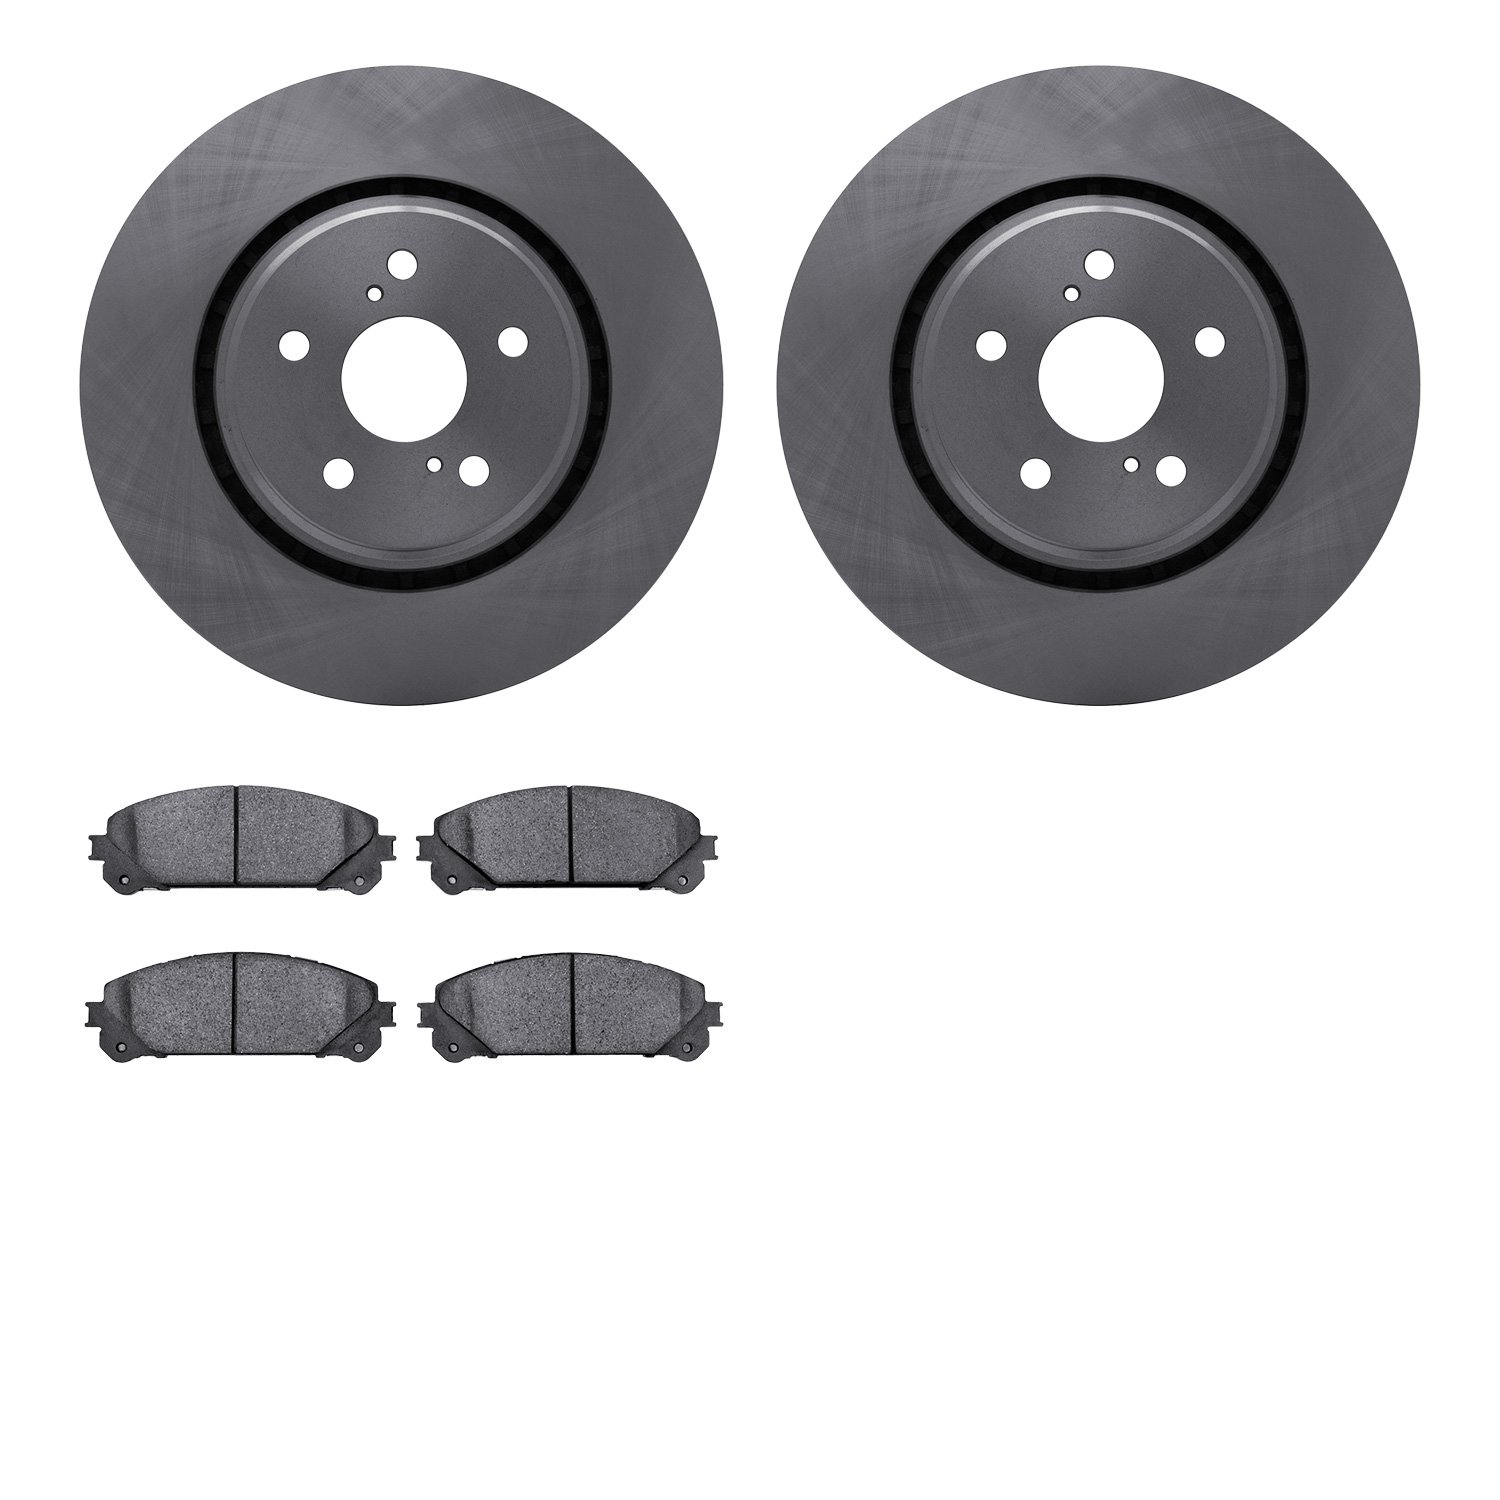 6302-75029 Brake Rotors with 3000-Series Ceramic Brake Pads Kit, Fits Select Lexus/Toyota/Scion, Position: Front